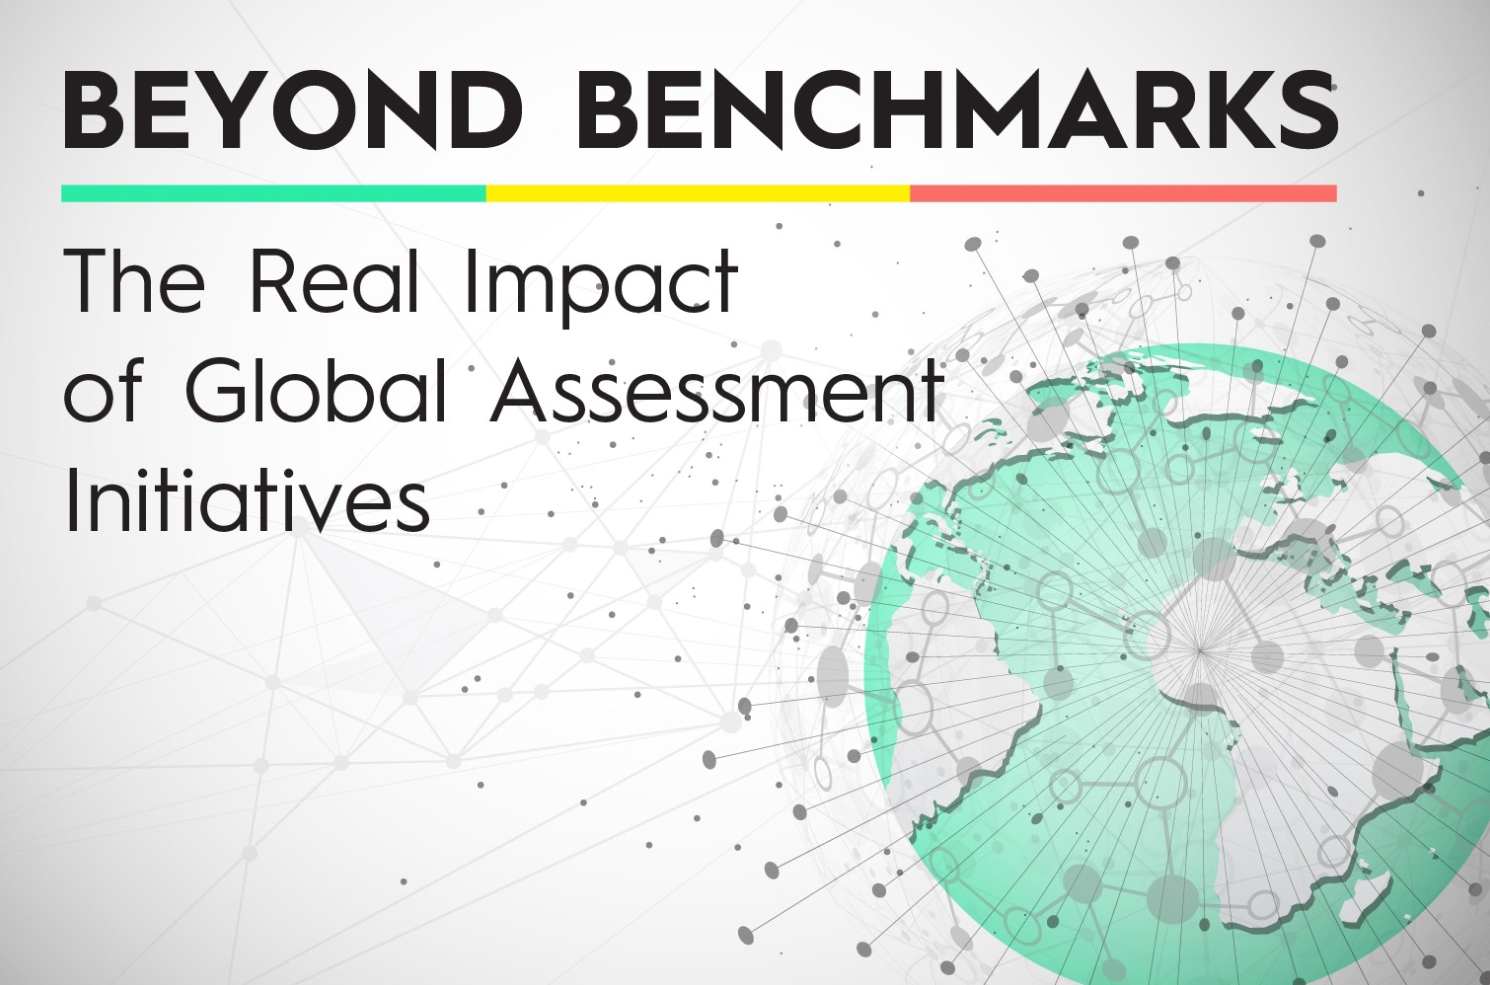 Beyond Benchmarks: The Real Impact of Global Assessment Initiatives